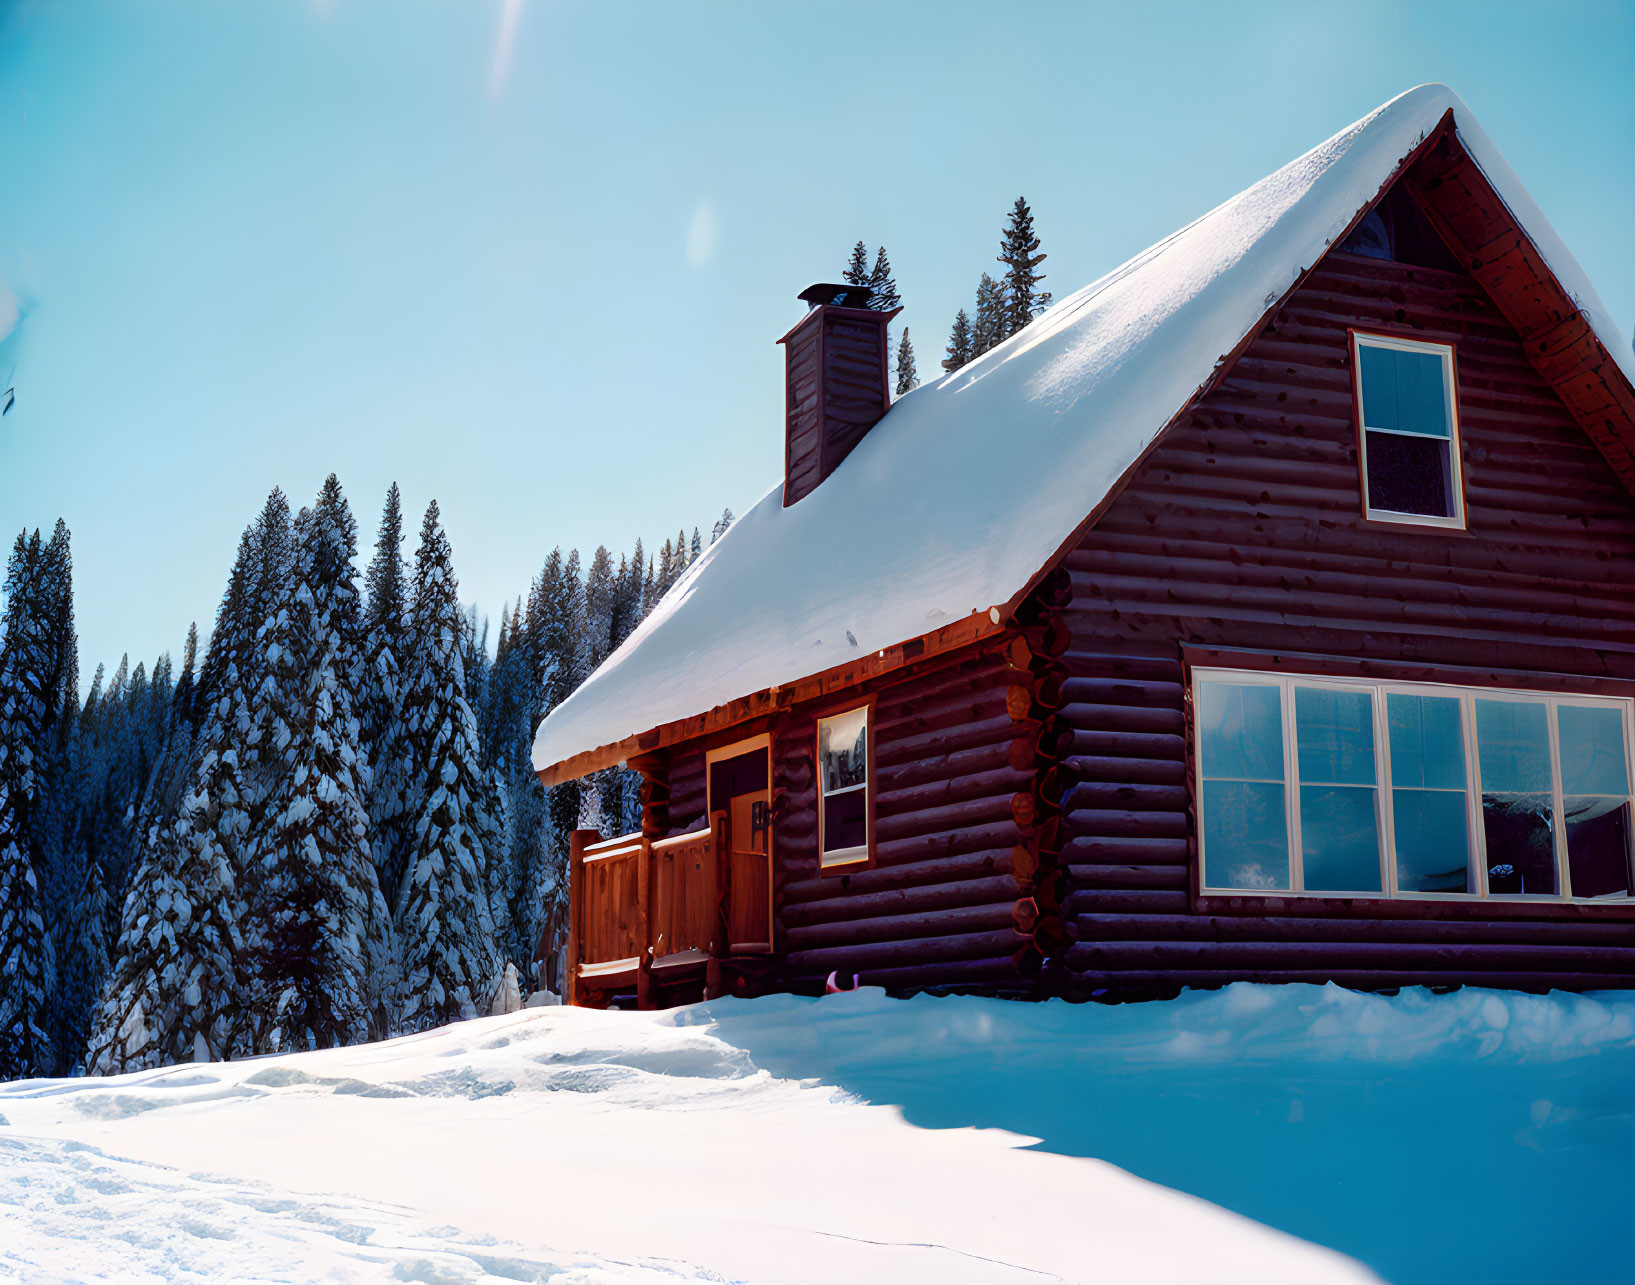 Snow-covered log cabin in winter forest scene